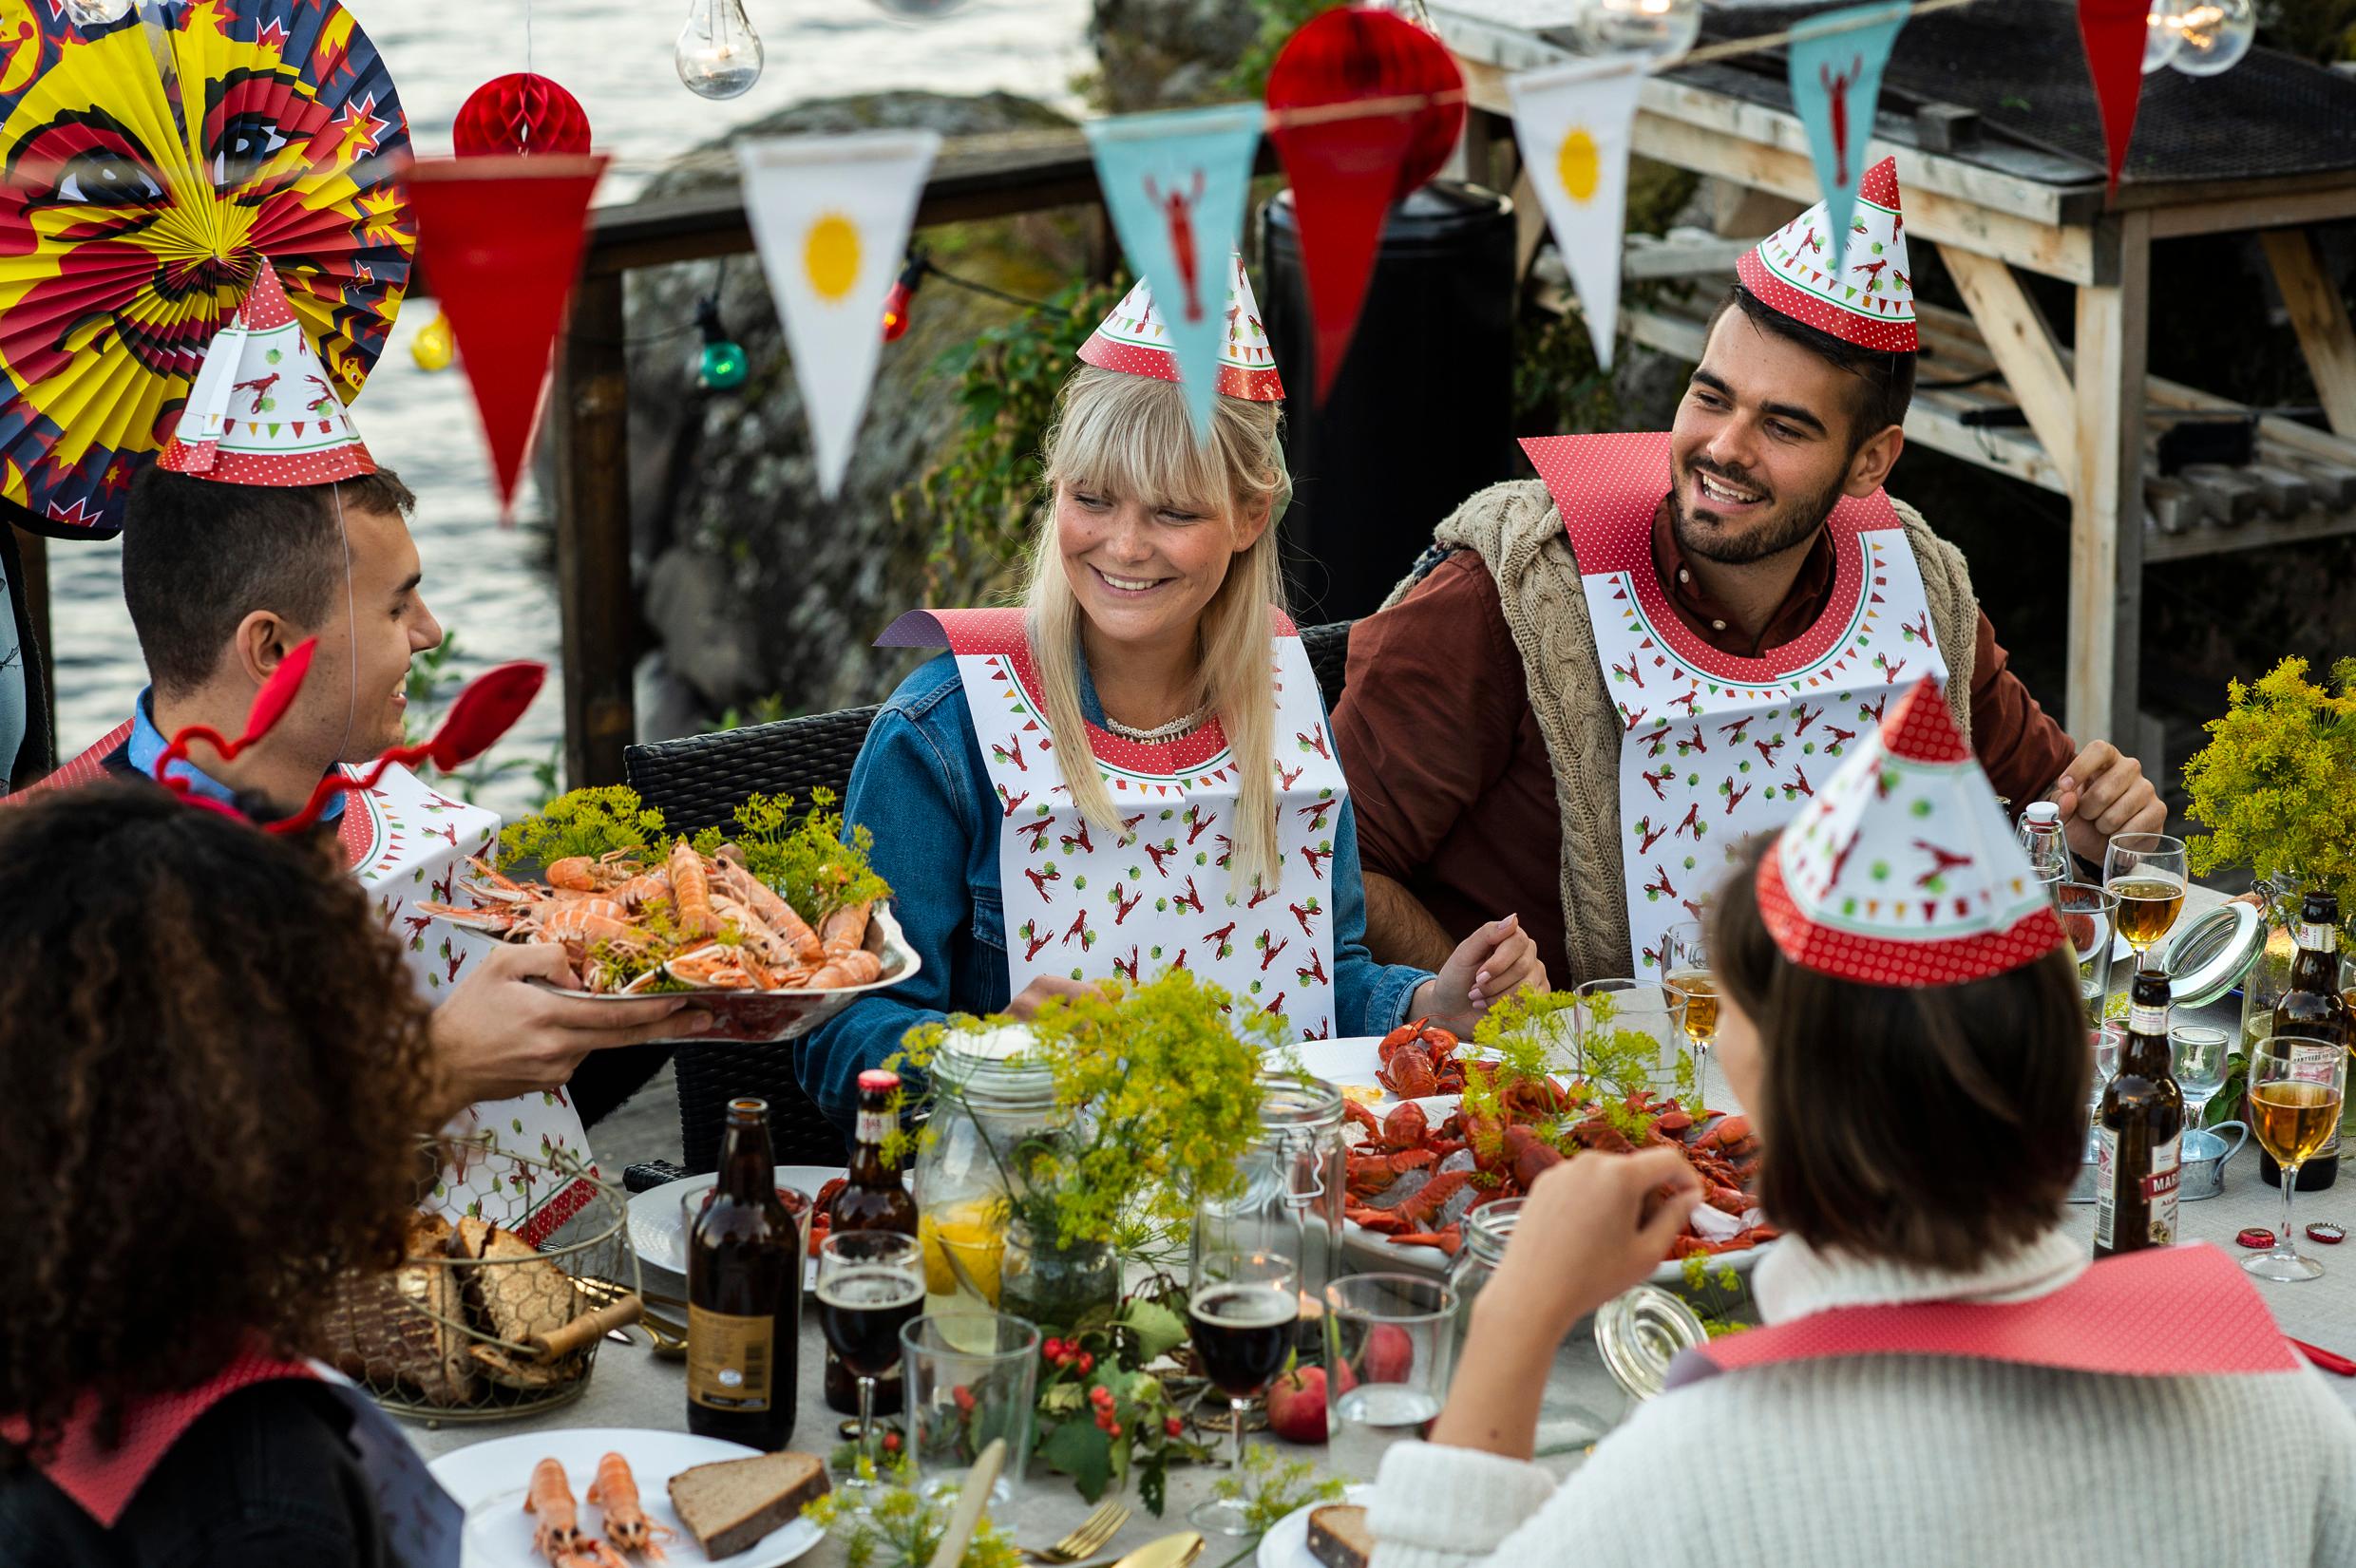 Five people dressed in paper hats and bibs sits at a table by the sea having a crayfish party. There are paper lanterns, lights and decorations above the table.